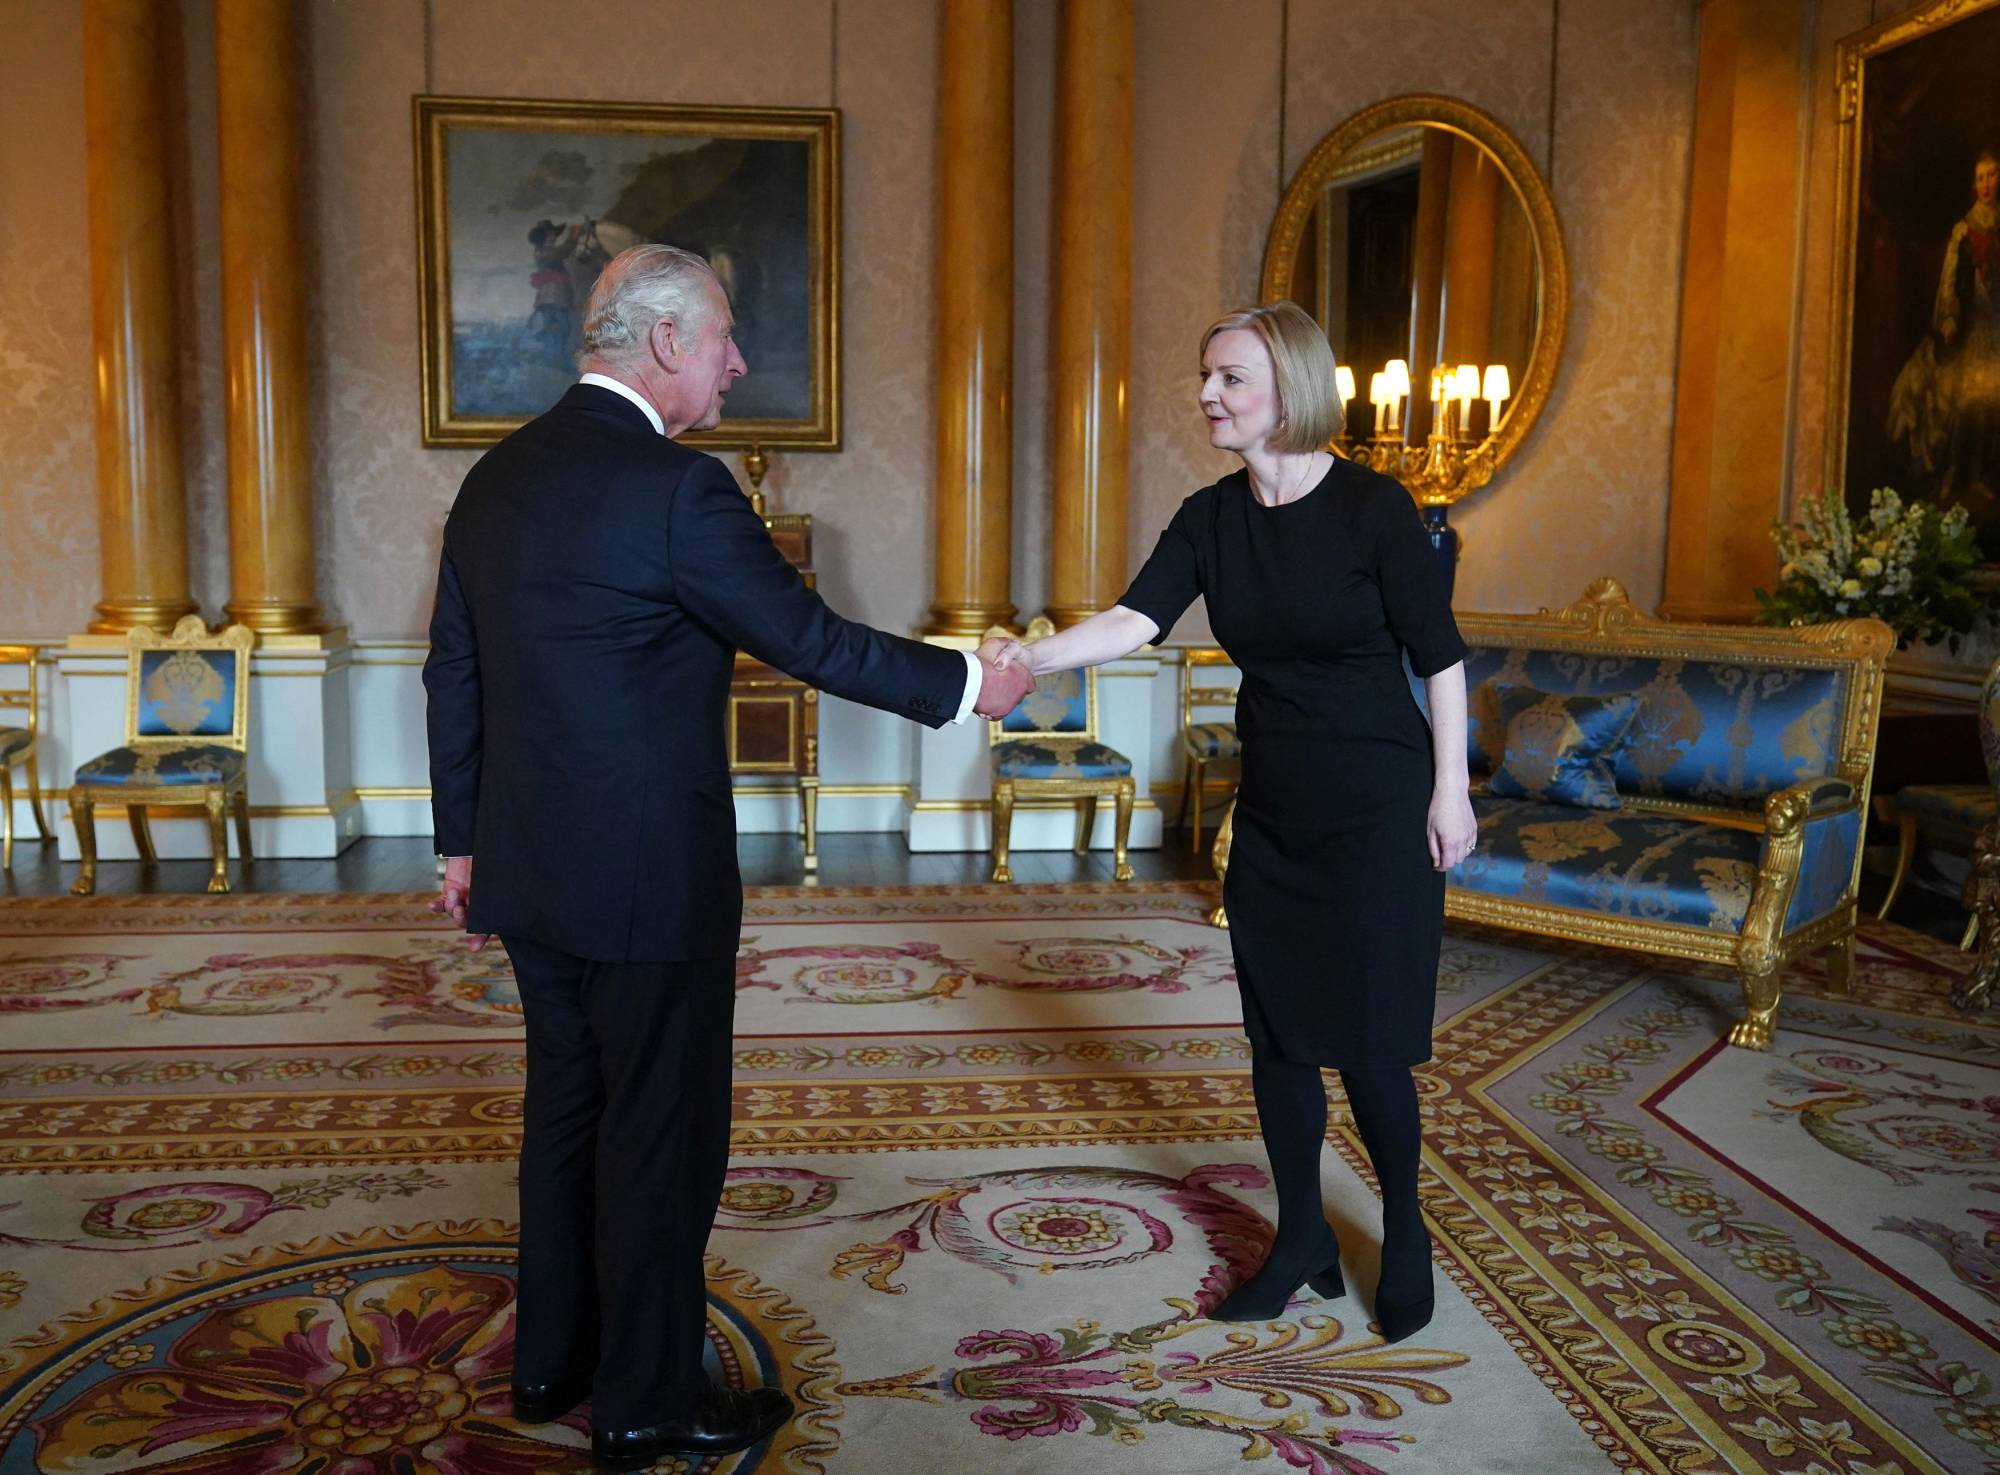 King Charles III greets Britain's new prime minister, Liz Truss, during their first meeting at Buckingham Palace in London on Friday. | POOL / AFP-JIJ